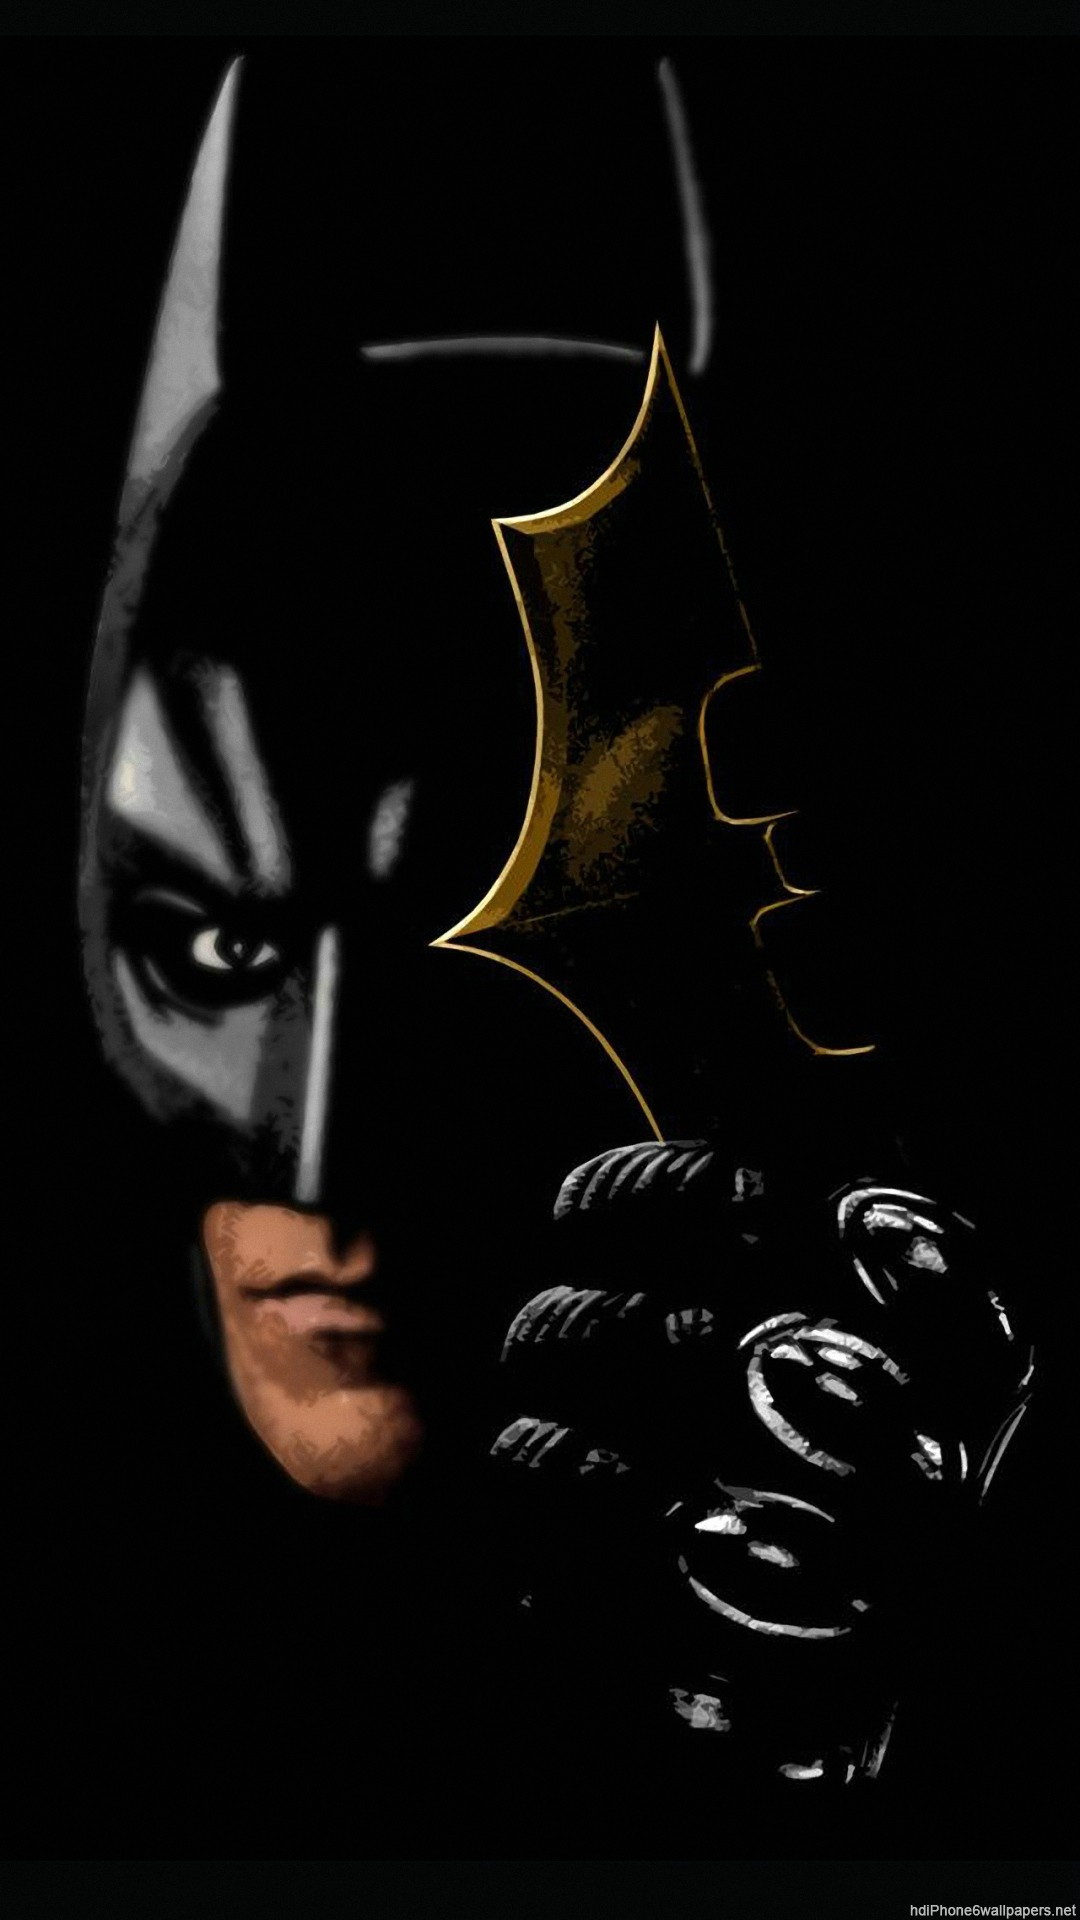 Batman Cellphone Wallpaper with high-resolution 1080x1920 pixel. You can use this wallpaper for your Desktop Computer Backgrounds, Mac Wallpapers, Android Lock screen or iPhone Screensavers and another smartphone device